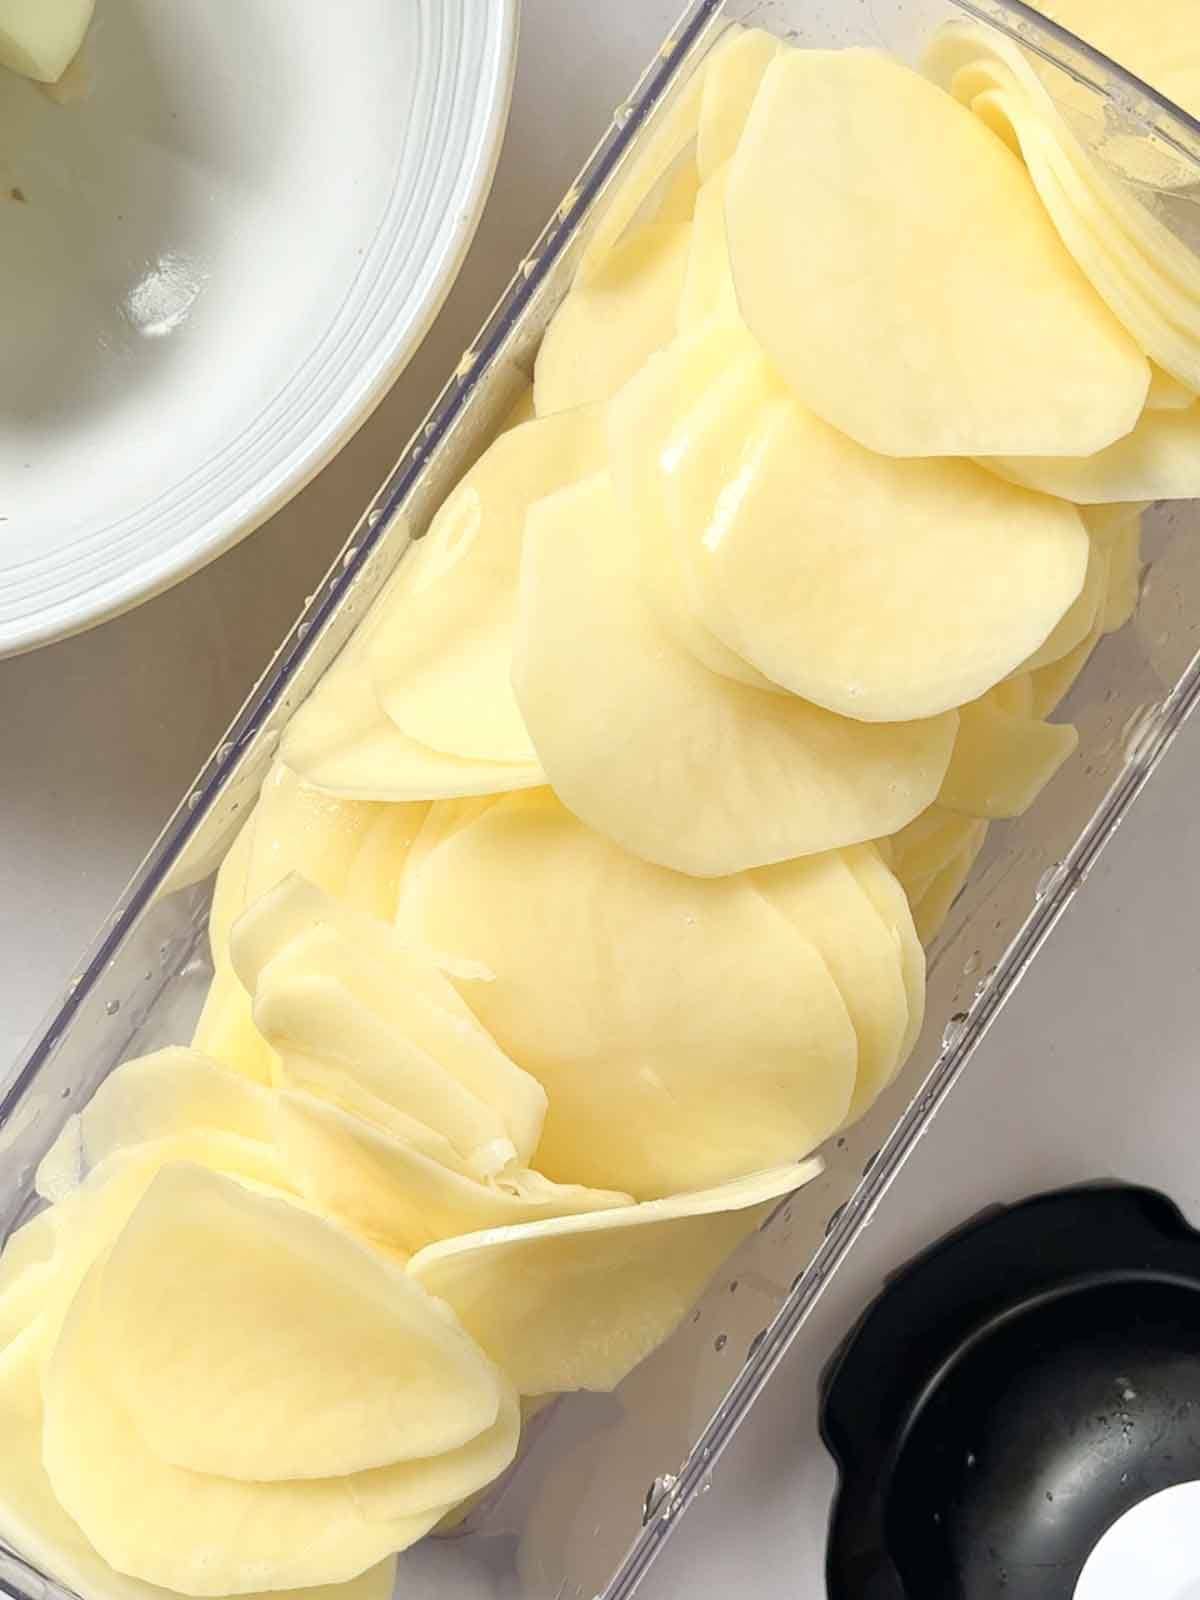 Finely sliced potatoes in a container, ready to make Boulangere Potatoes.